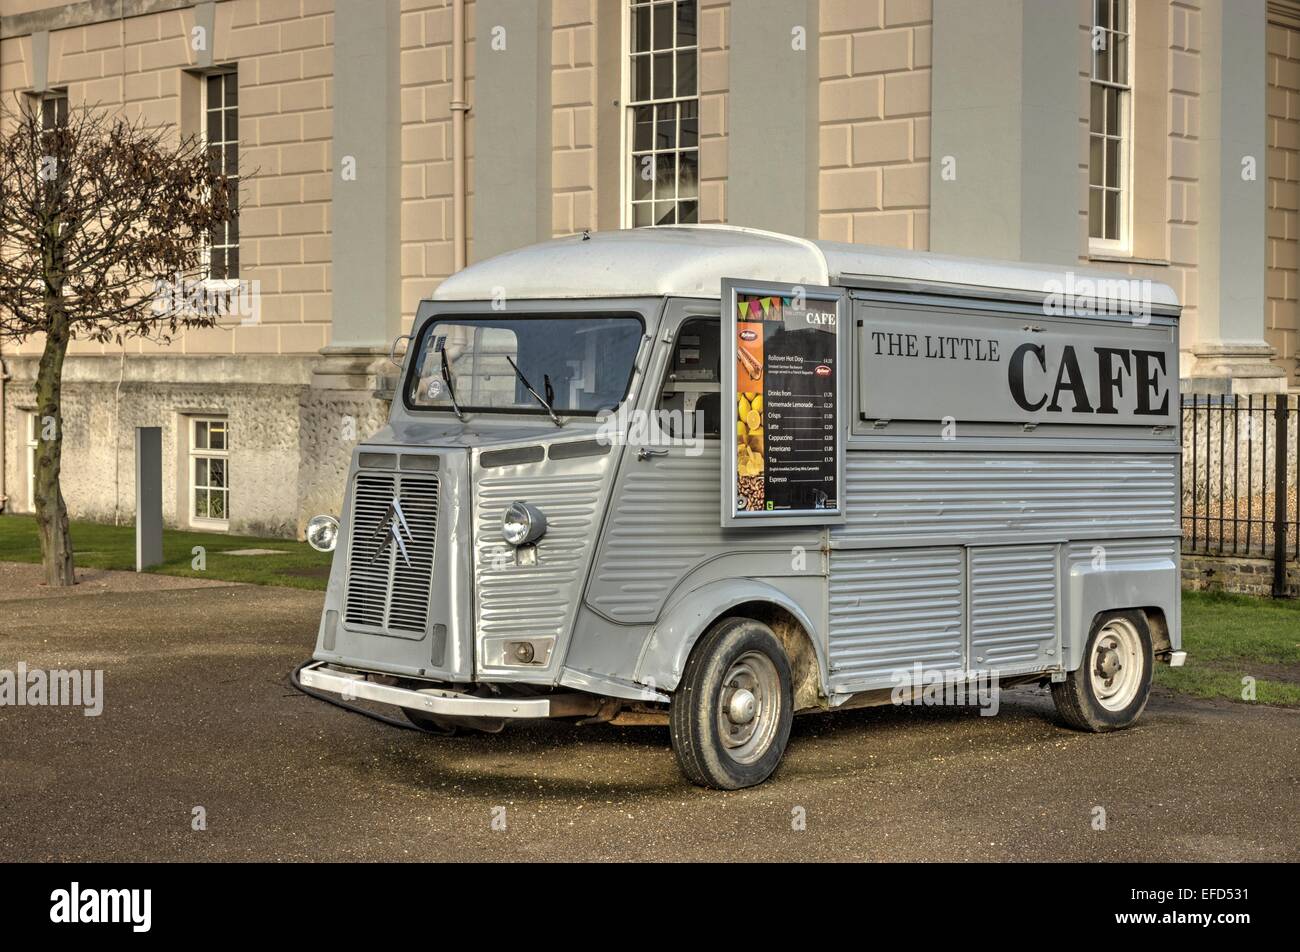 Cafe/van mobile cafe Greenwich Foto Stock